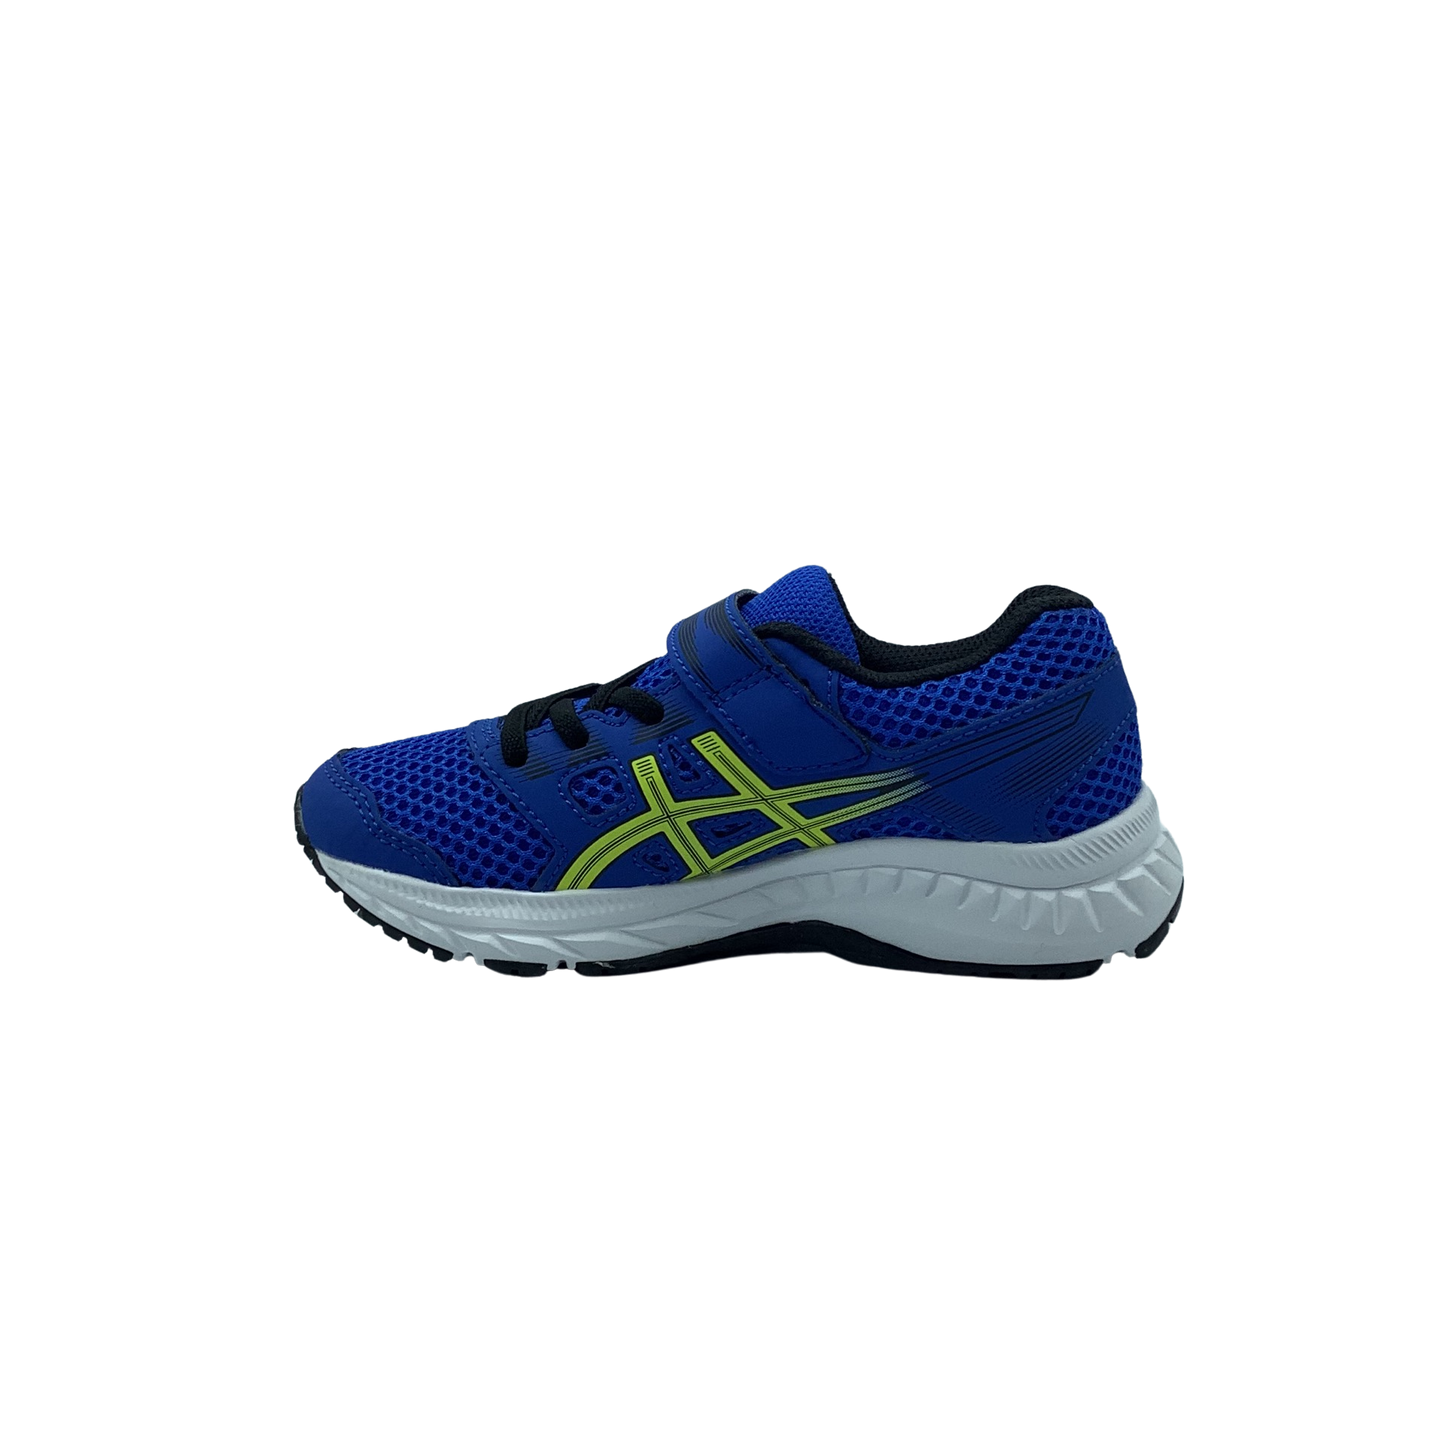 Asics CONTEND 5 PS